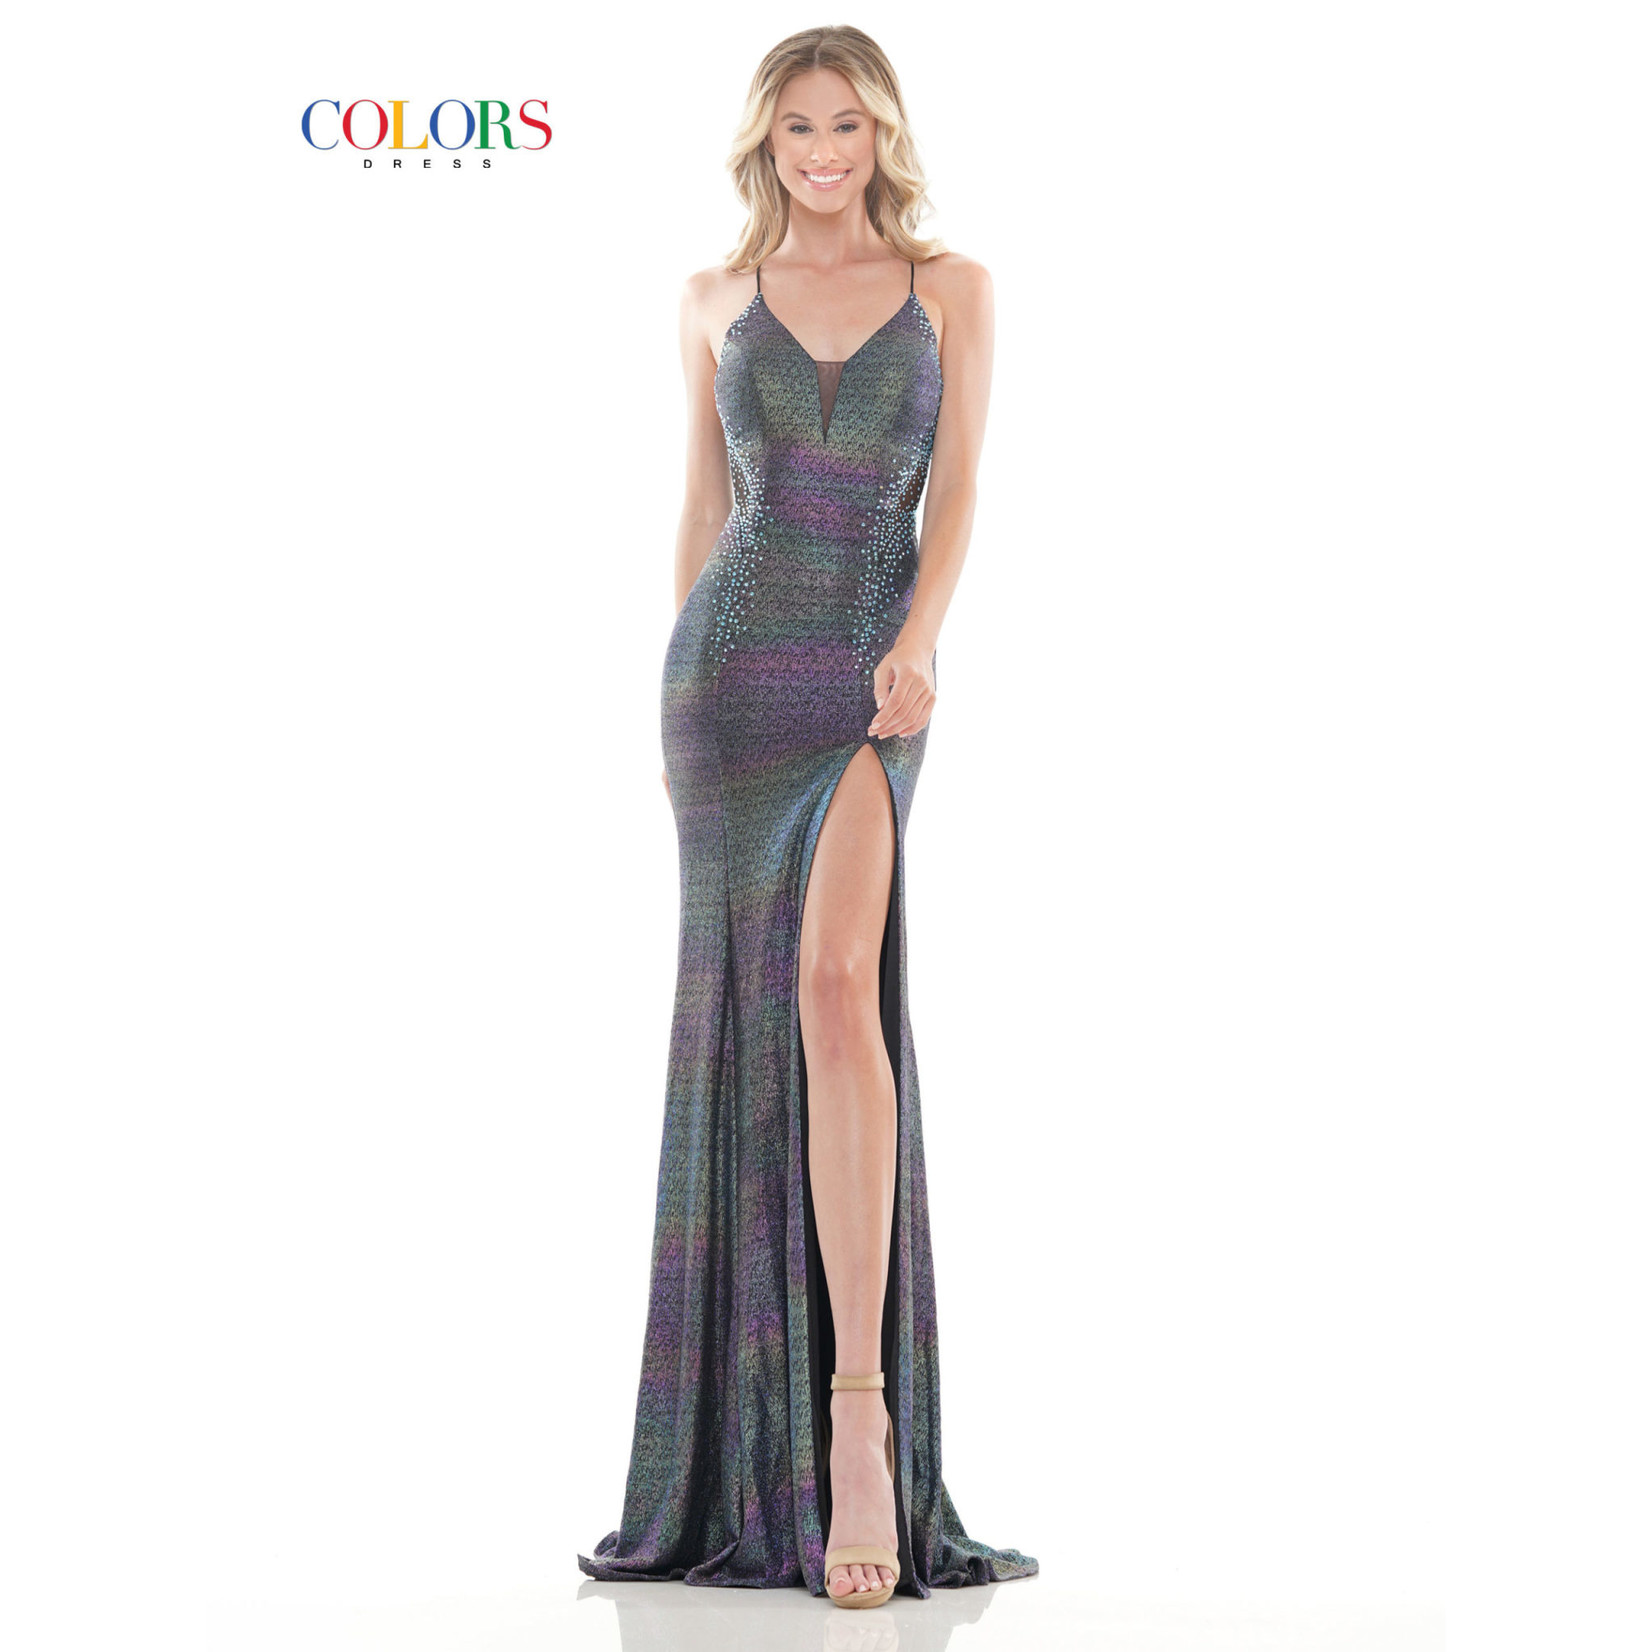 Colors Colors 2669 Metallic Rhinestone Embellished Gown